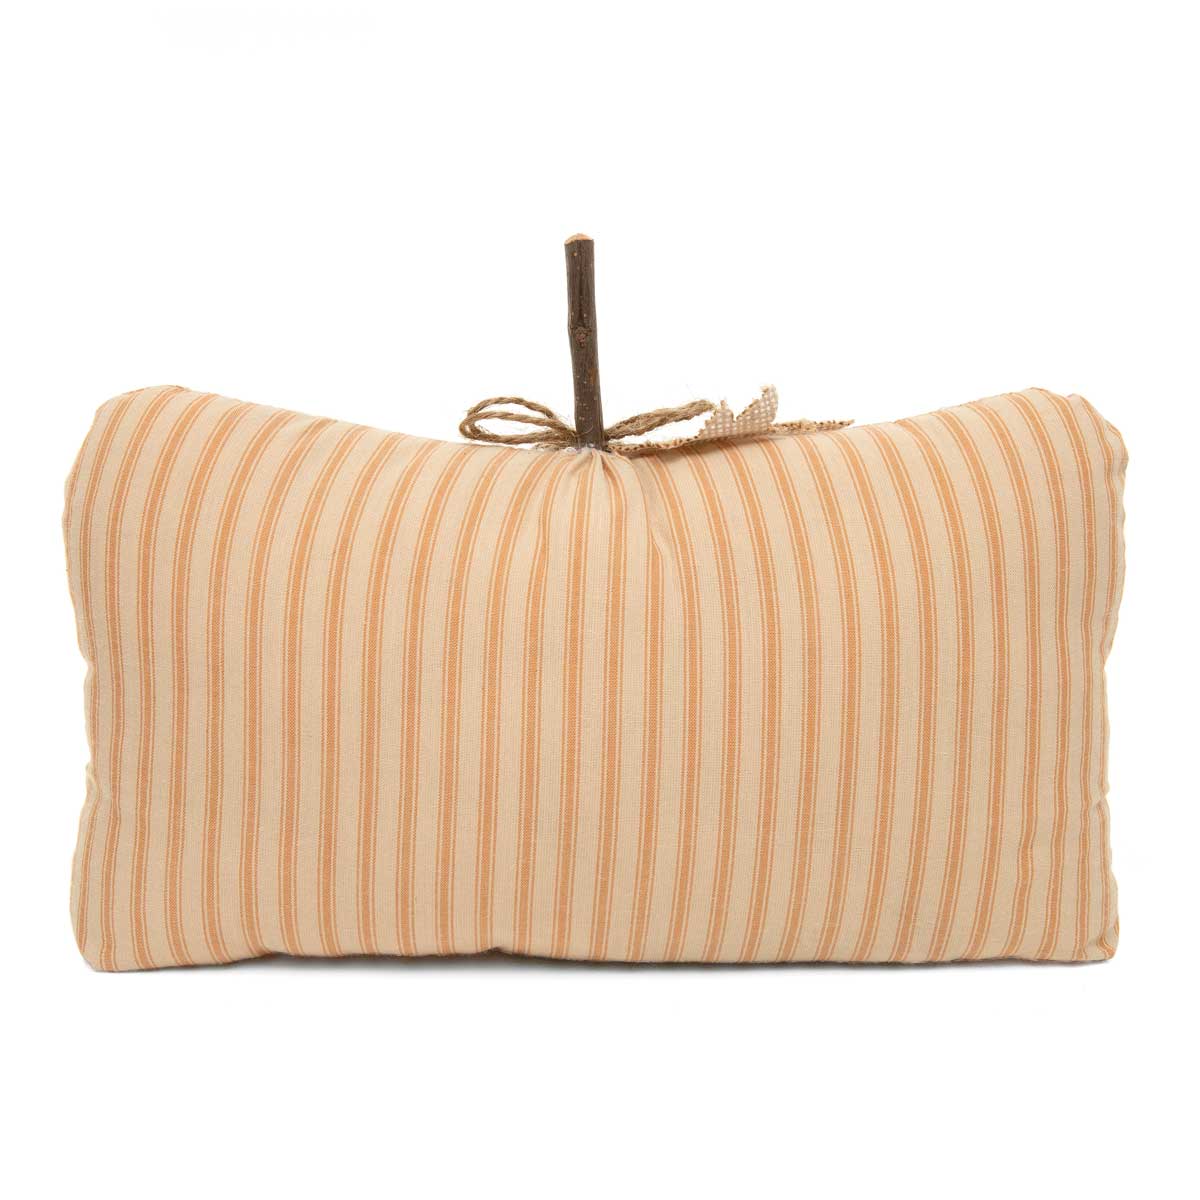 PILLOW PUMPKIN FACE LARGE 12.5IN X 4.25IN X 6.5IN ORANGE/BEIGE - Click Image to Close